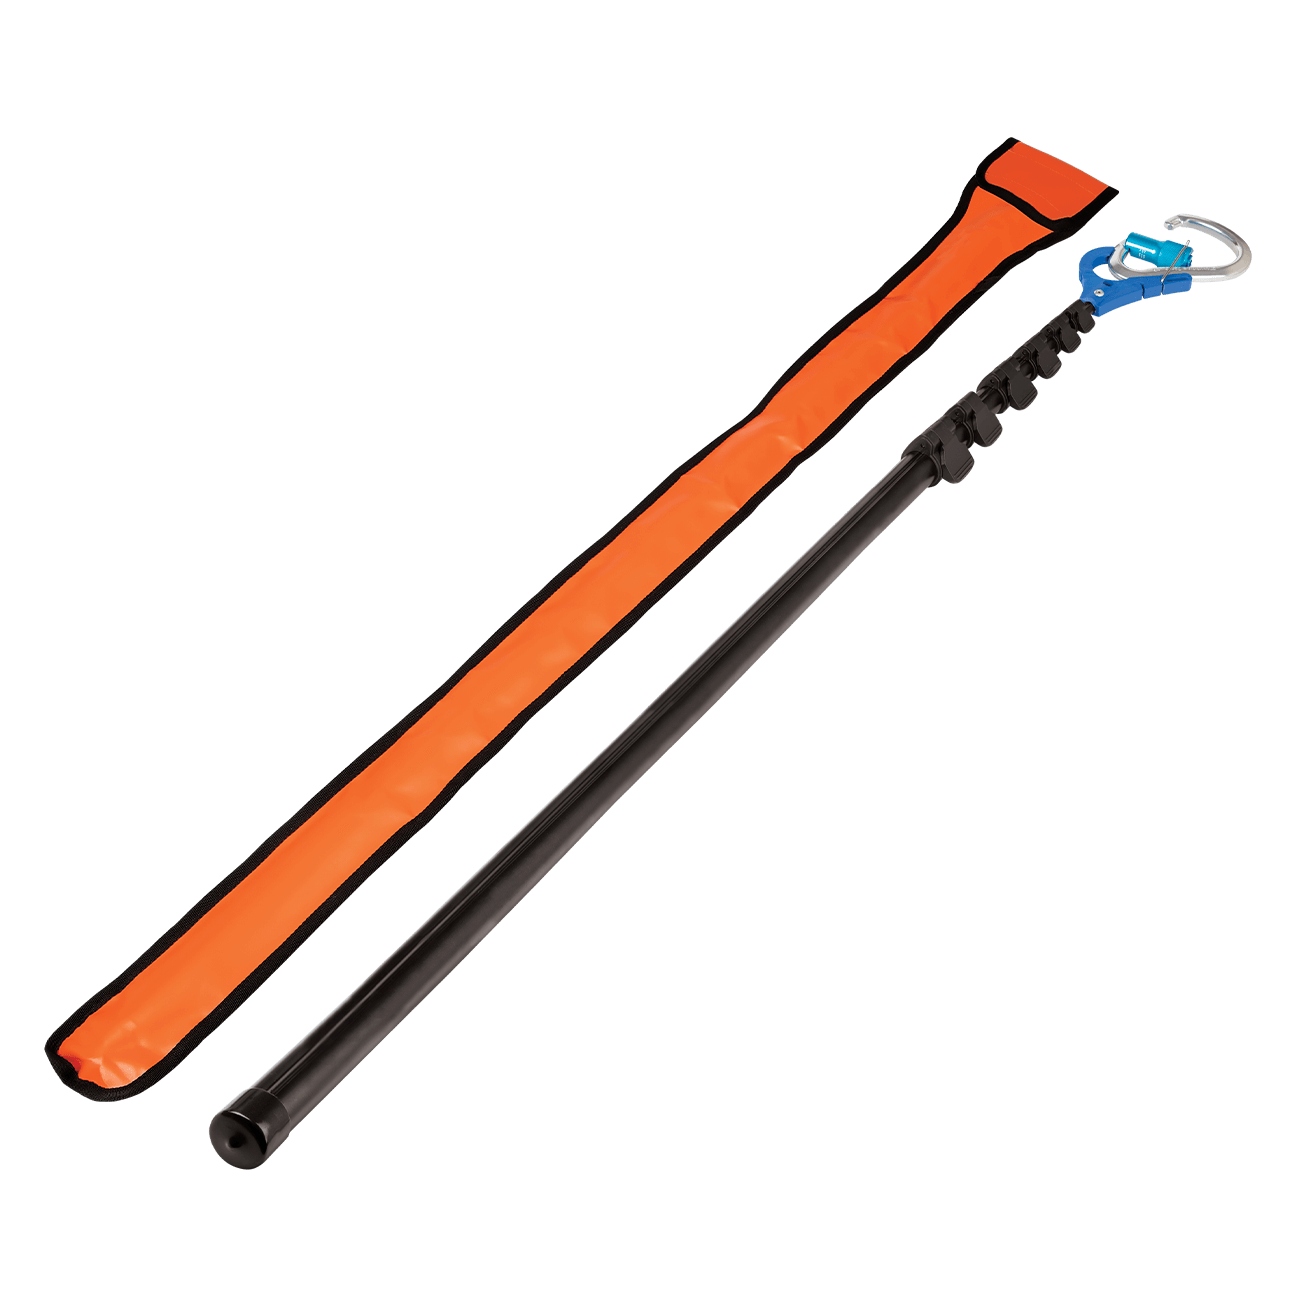 Adjustable-reach Rescue Pole with Carabiner